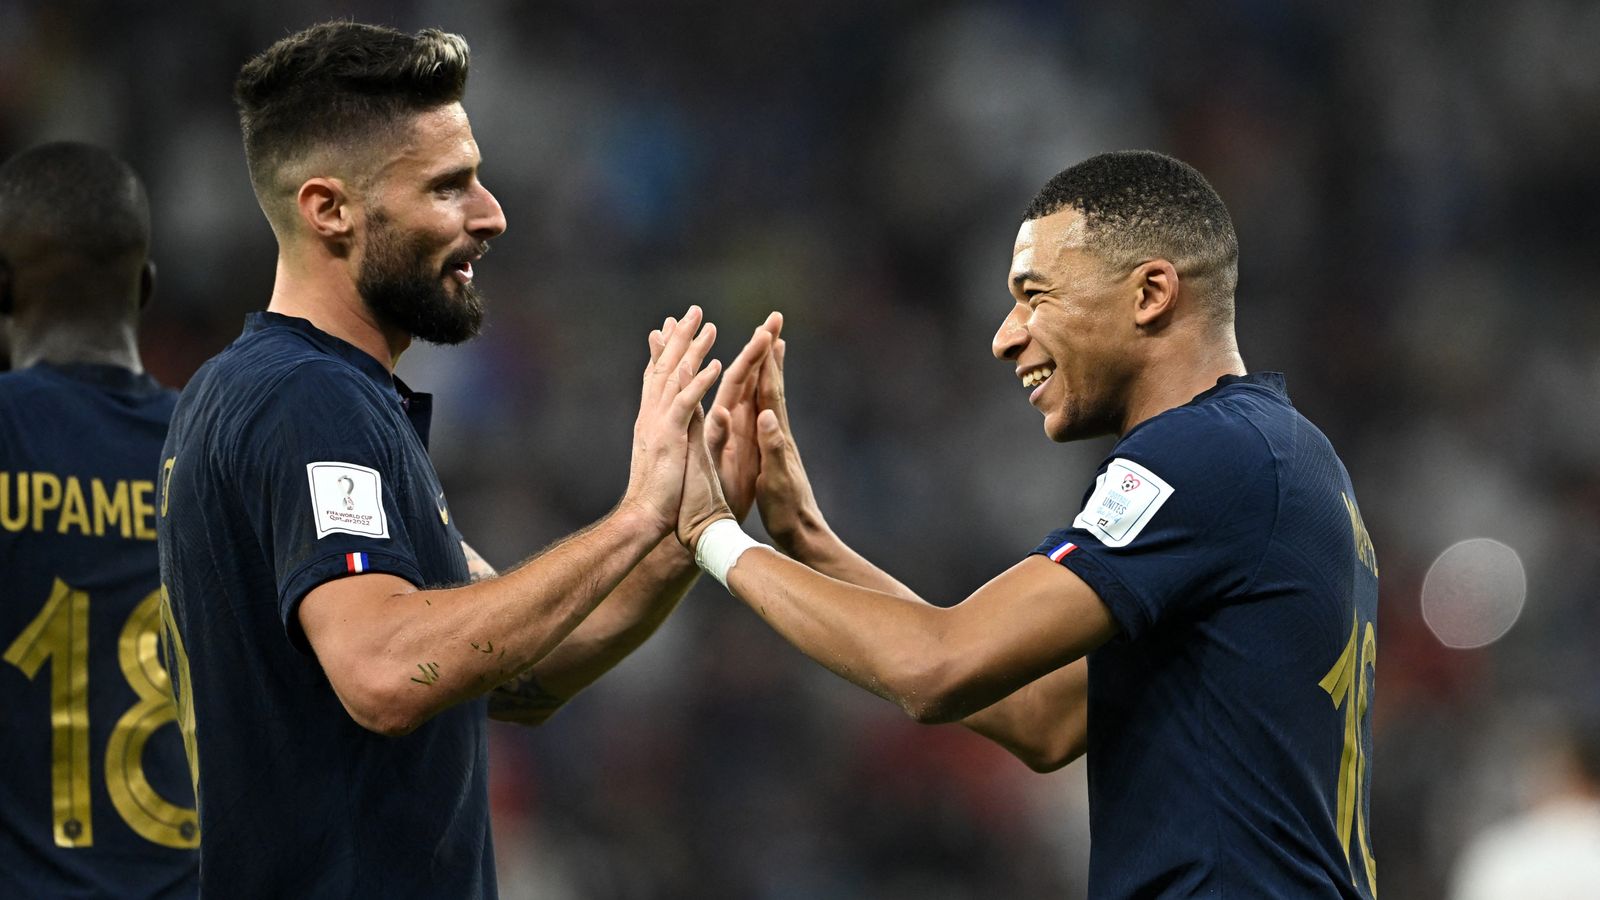 World Cup 2022: Olivier Giroud and Kylian Mbappe both break records as France reach quarter-finals